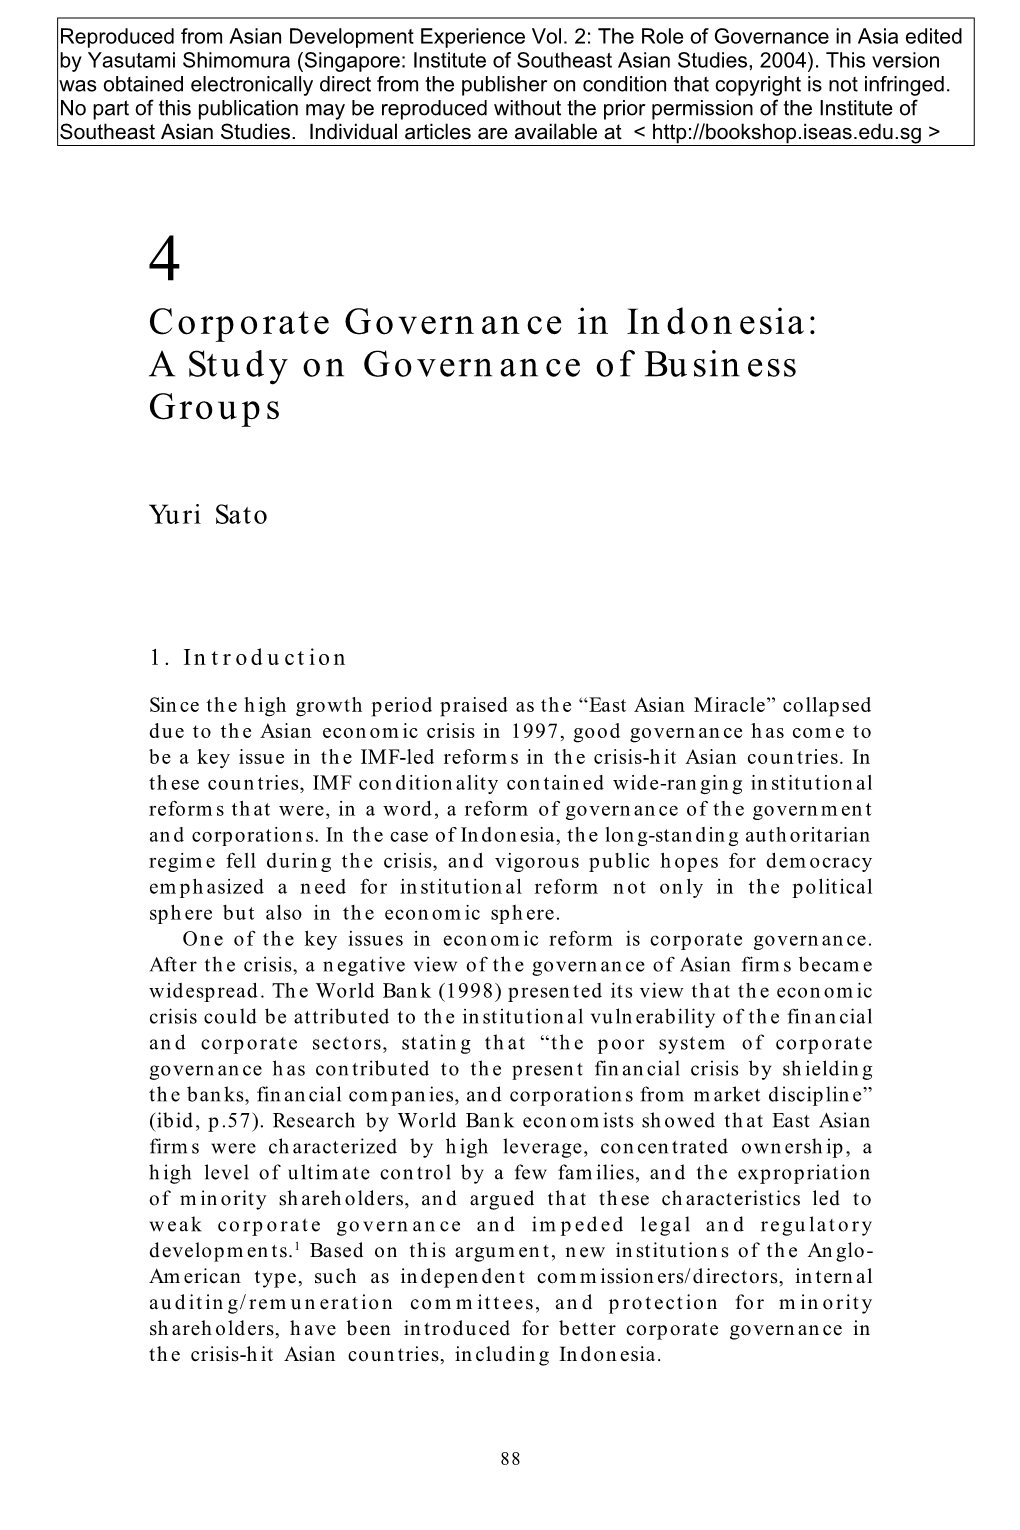 Corporate Governance in Indonesia: a Study on Governance of Business Groups